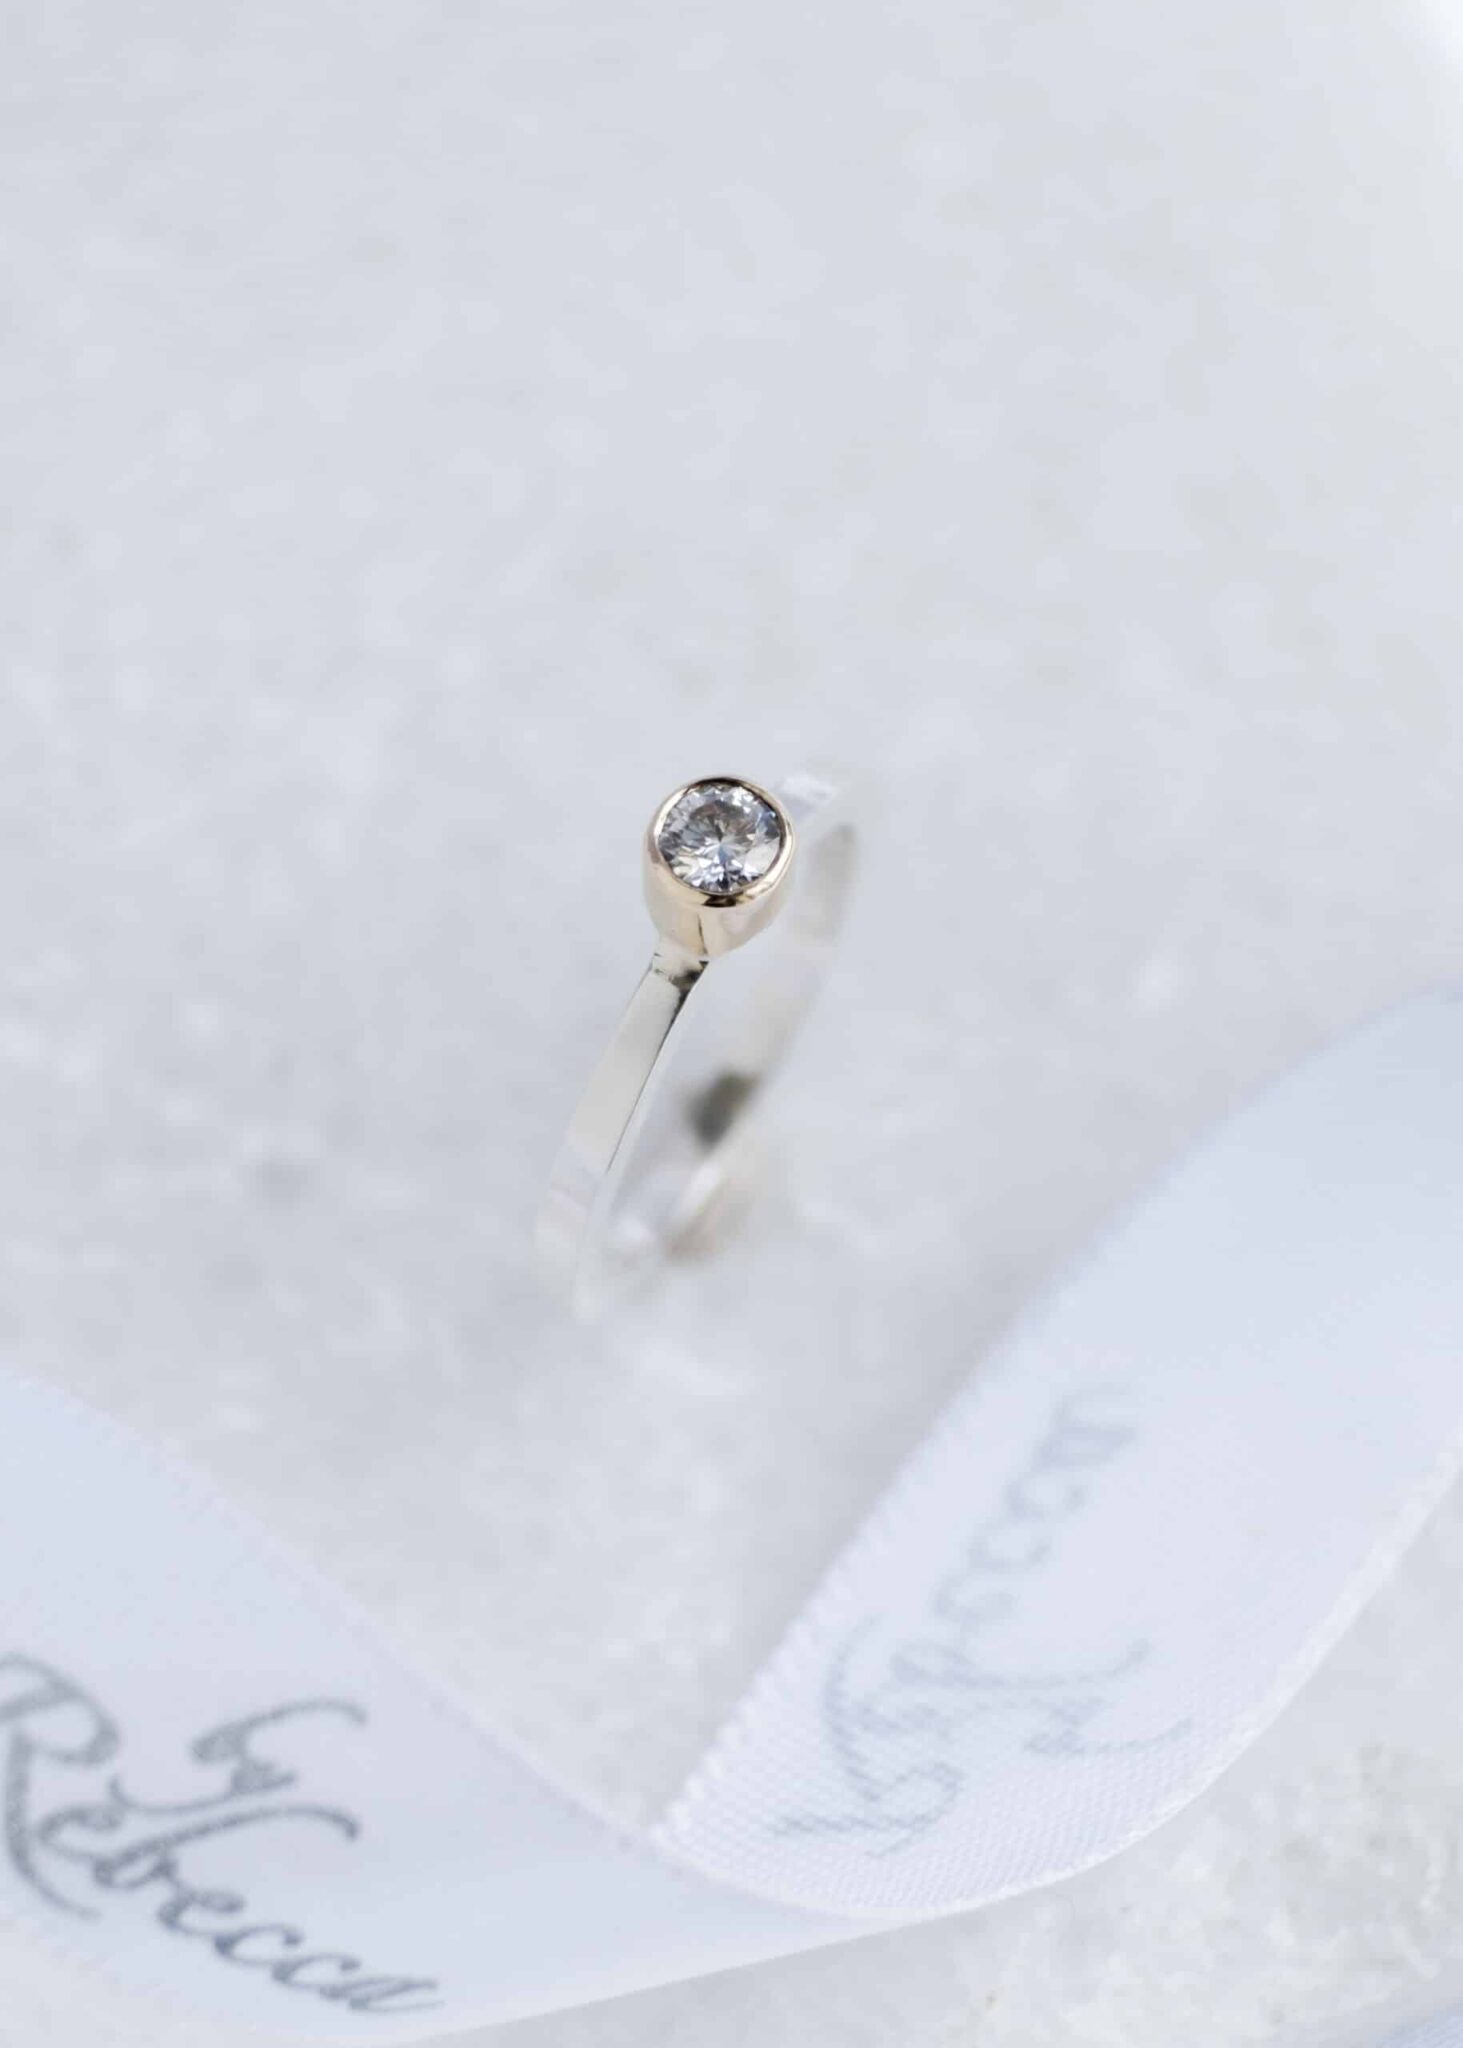 4mm clear moissanite ring